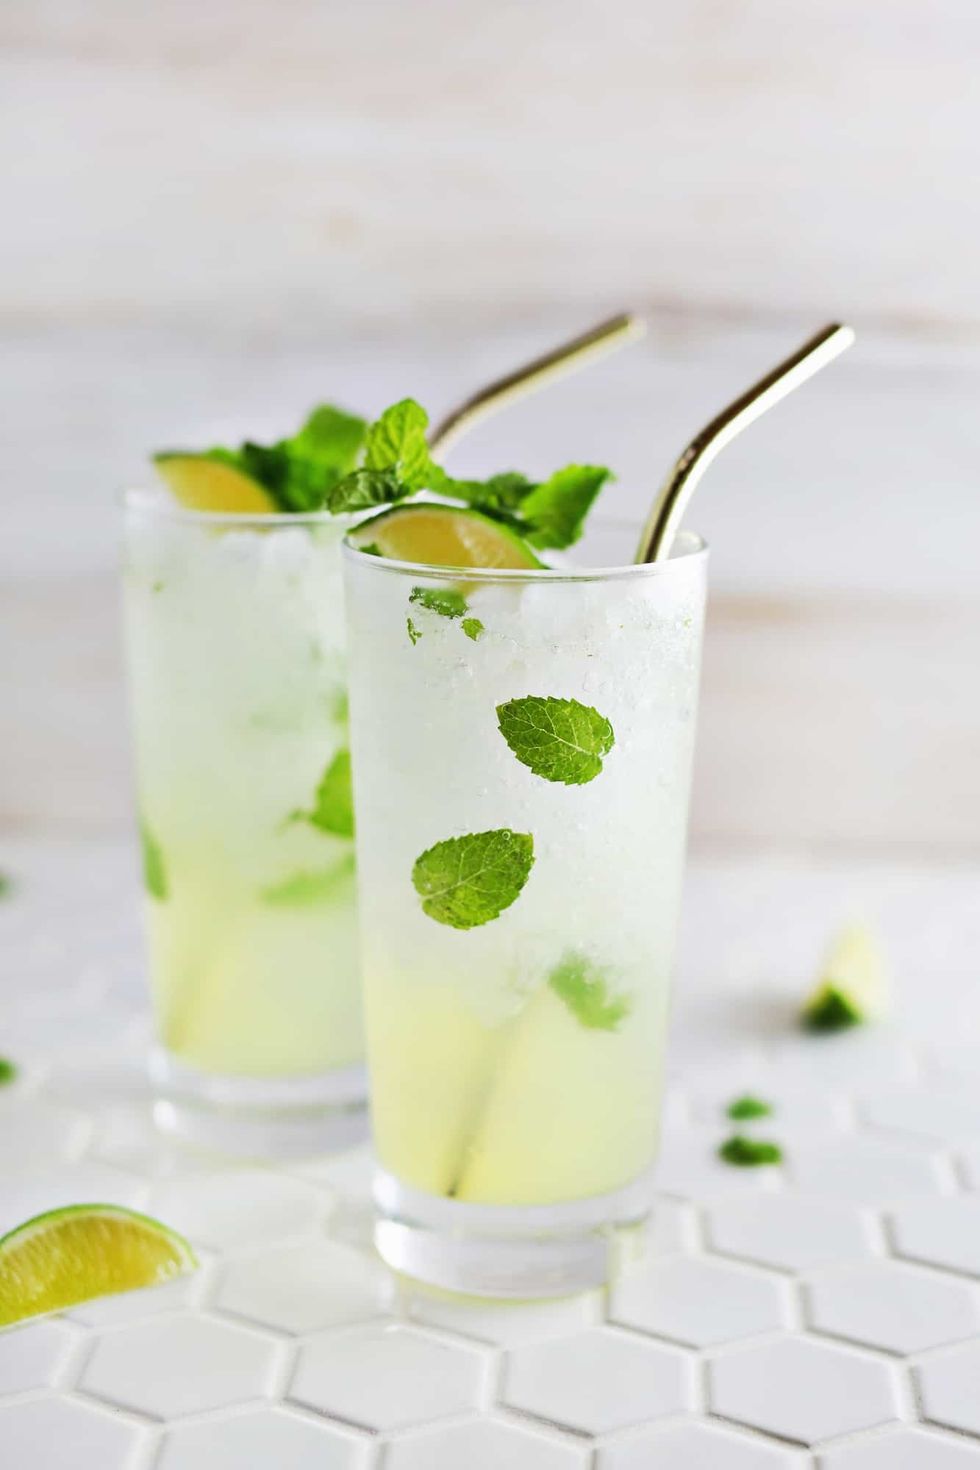 The Coconut Mojito Is My Favorite Go-To Drink — Here's My Recipe